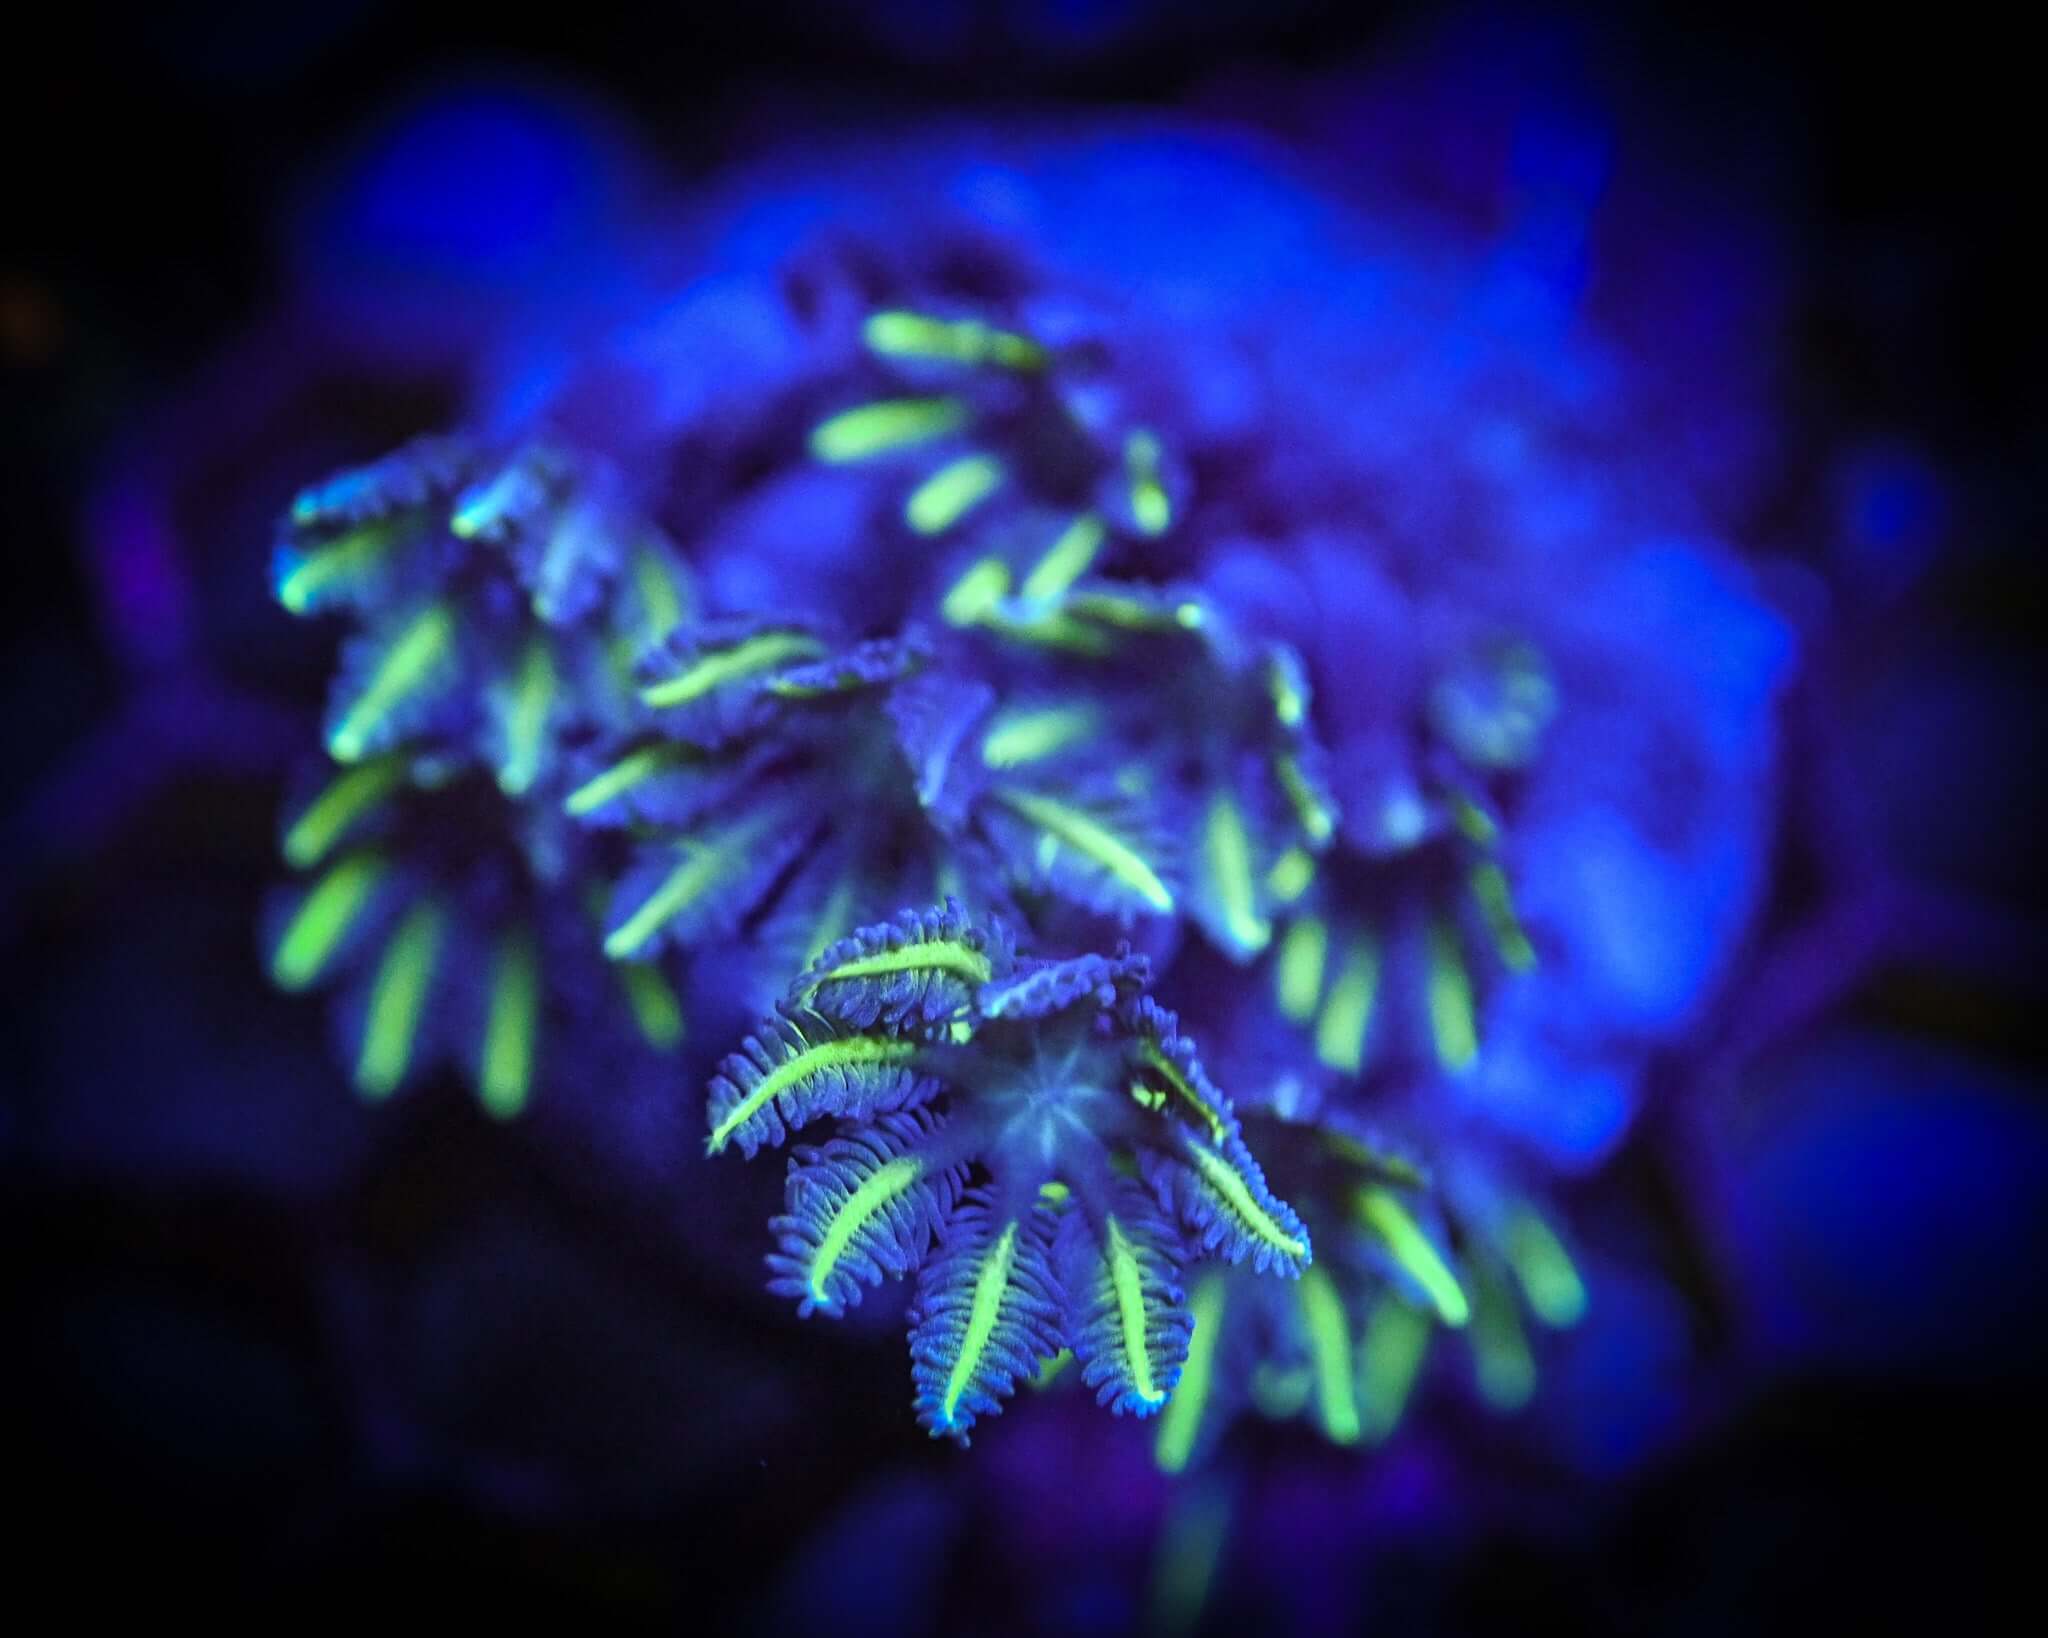 Green Clove Polyp Frag under blue lighting with glowing neon green tips, showcasing aquacultured coral's vibrant appearance.